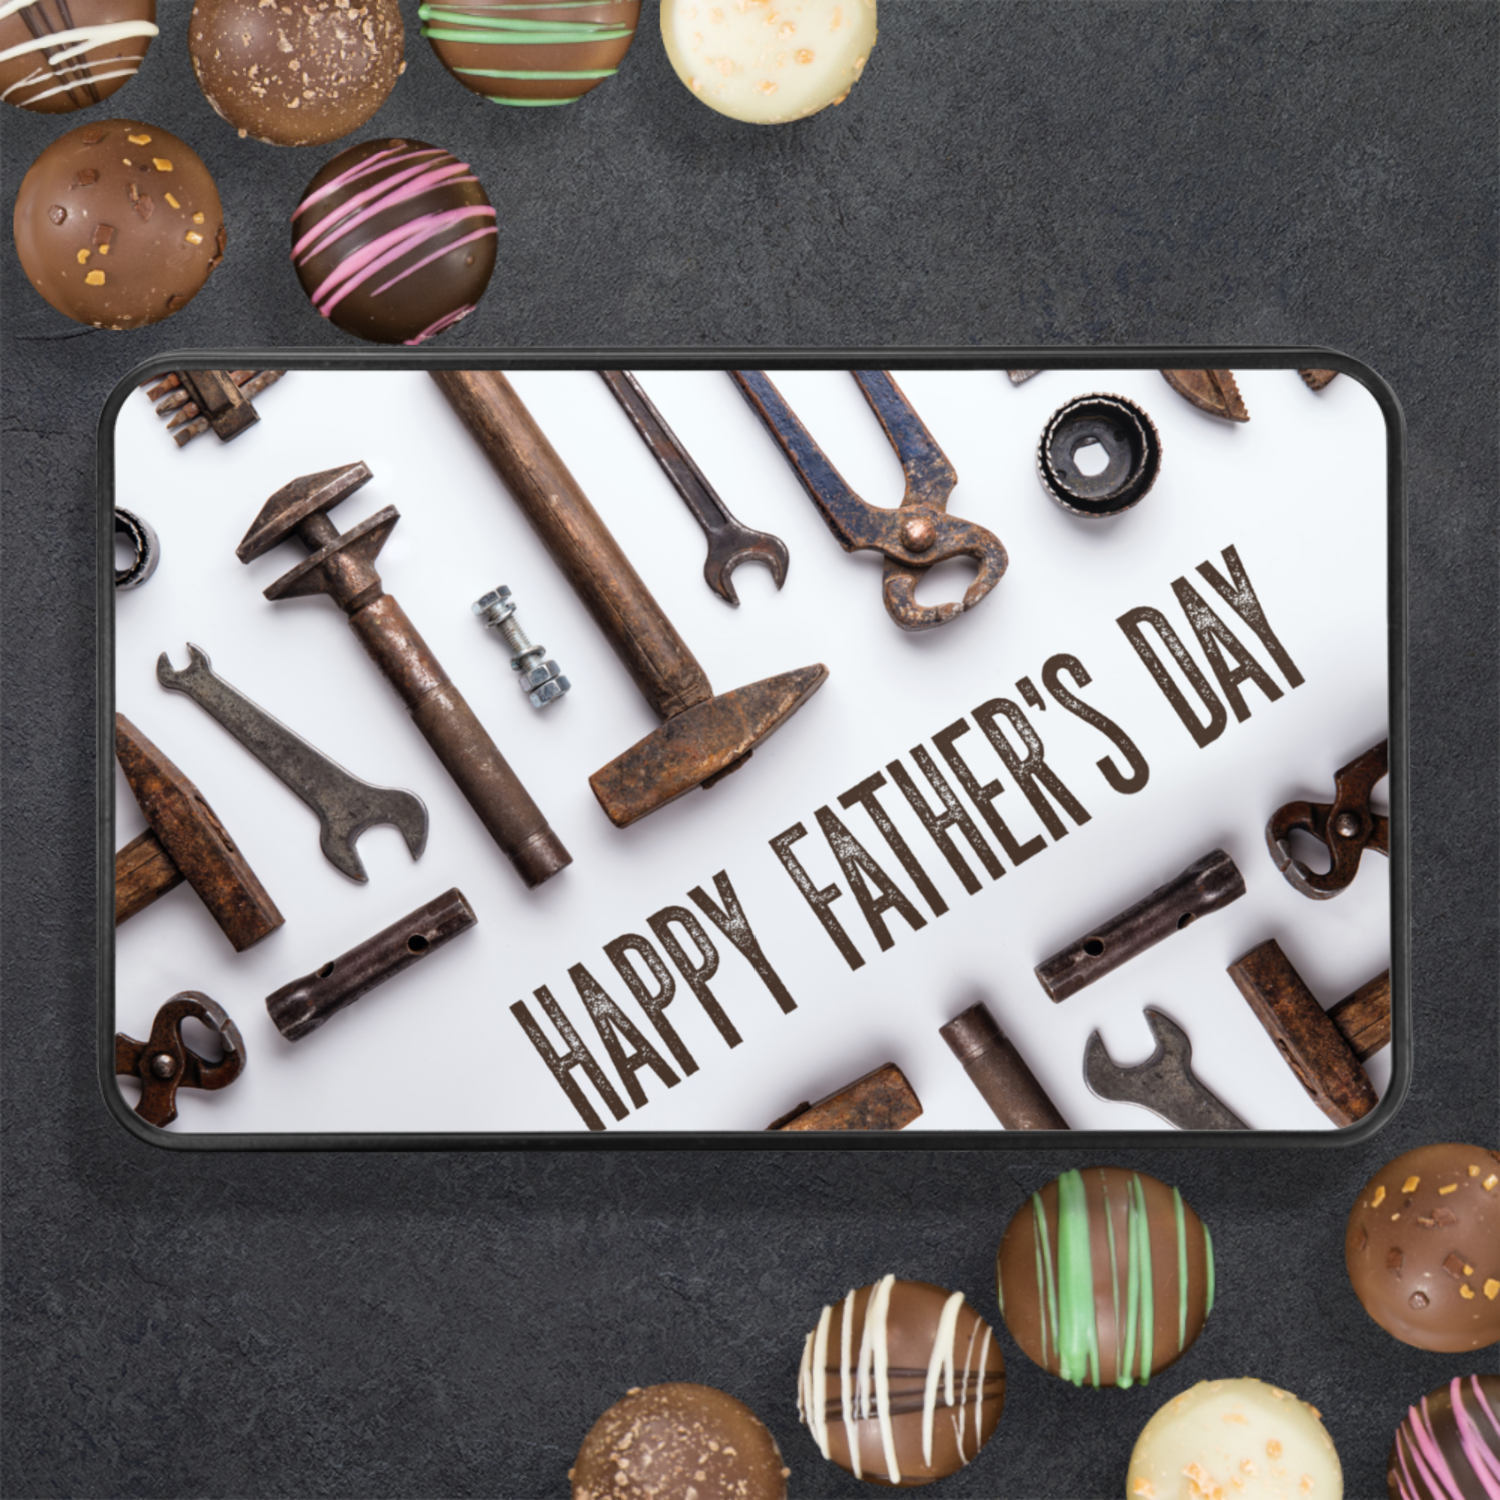 Fathers Day Chocolate Gift Box - Chocolate Truffles For Dad - Fathers Day Gift From Daughter - Mardonyx Candy